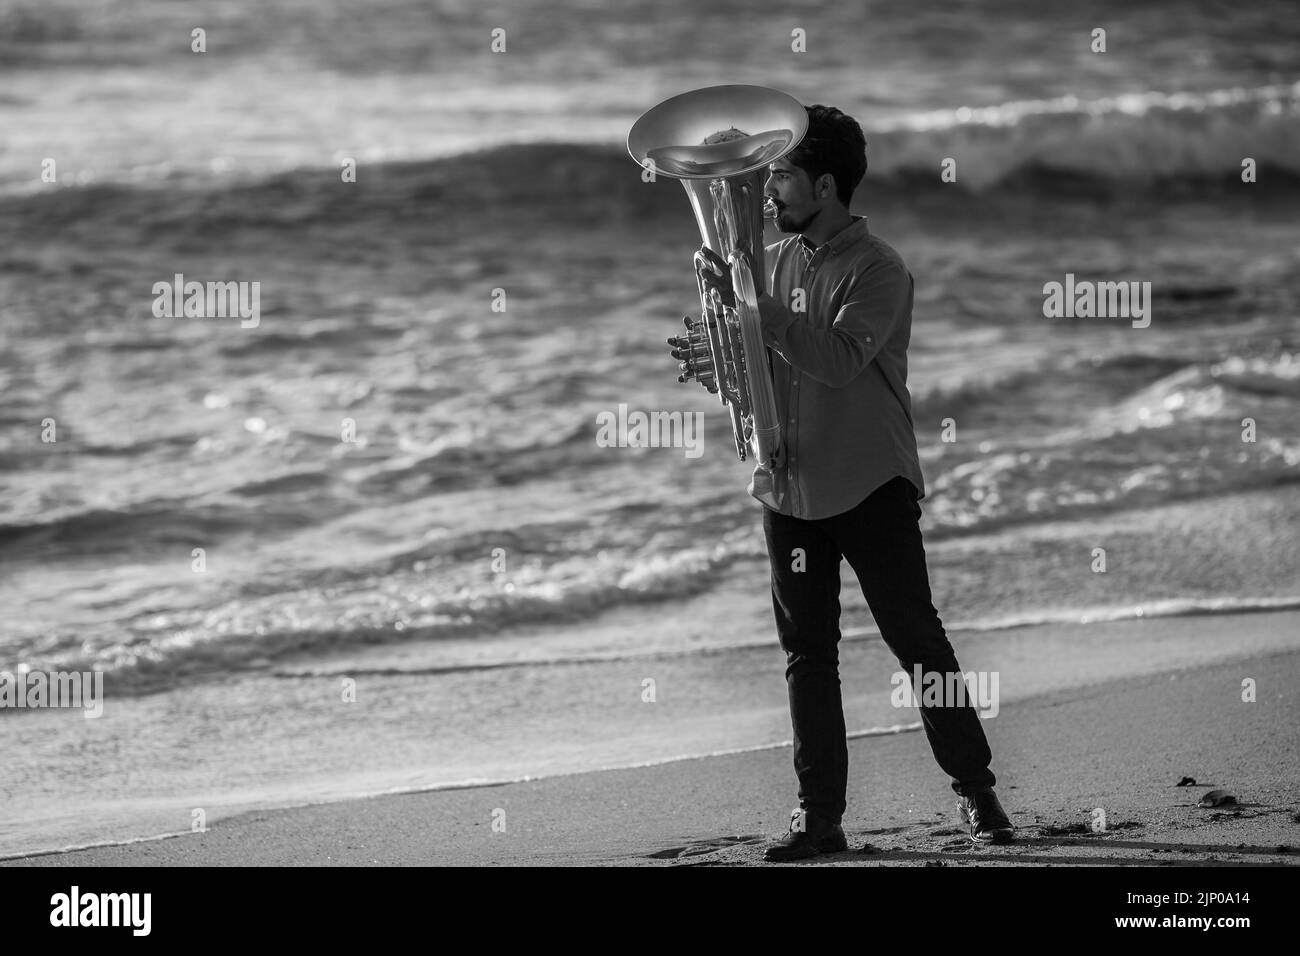 A man musician playing a tuba on the ocean beach. Black and white photo. Stock Photo